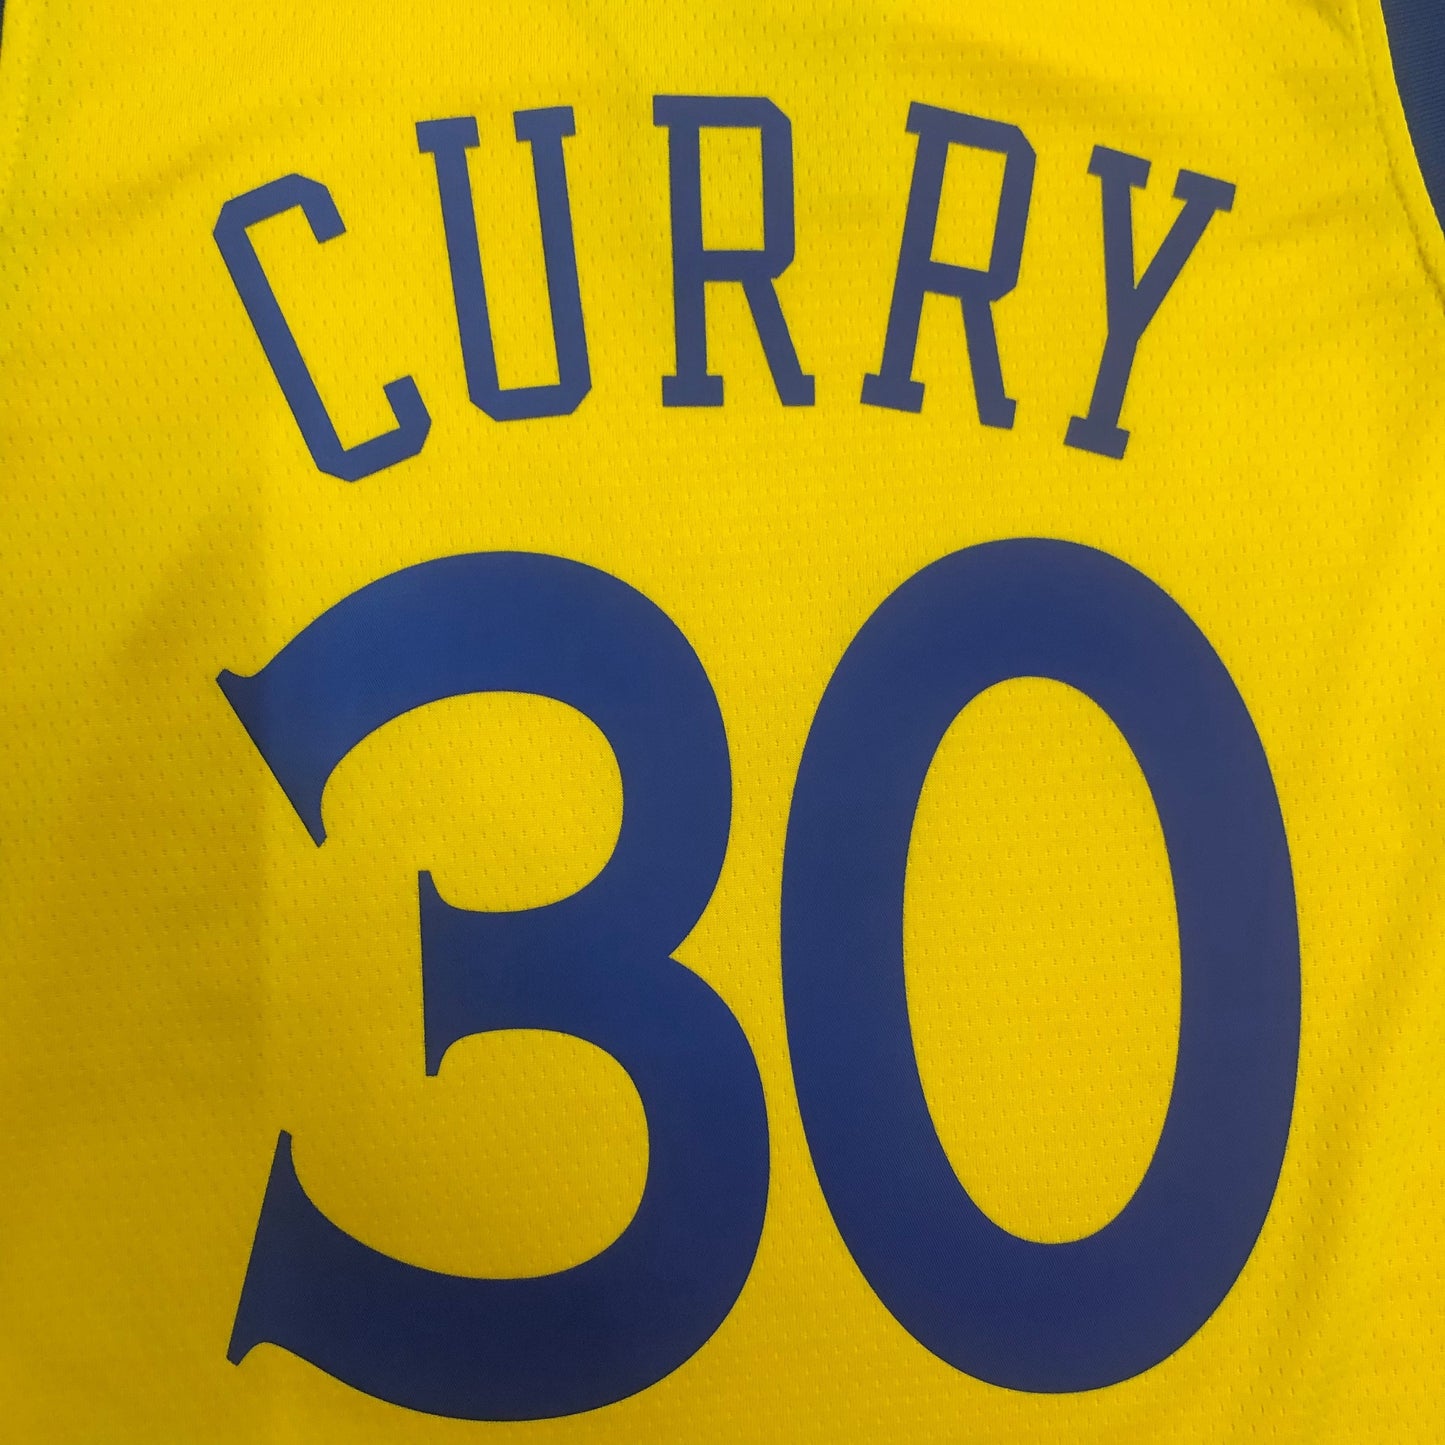 Golden State Warriors 2019/20 Stephen Curry Chinese Dragon ‘The Bay’ NBA Swingman Jersey - Nike City Edition